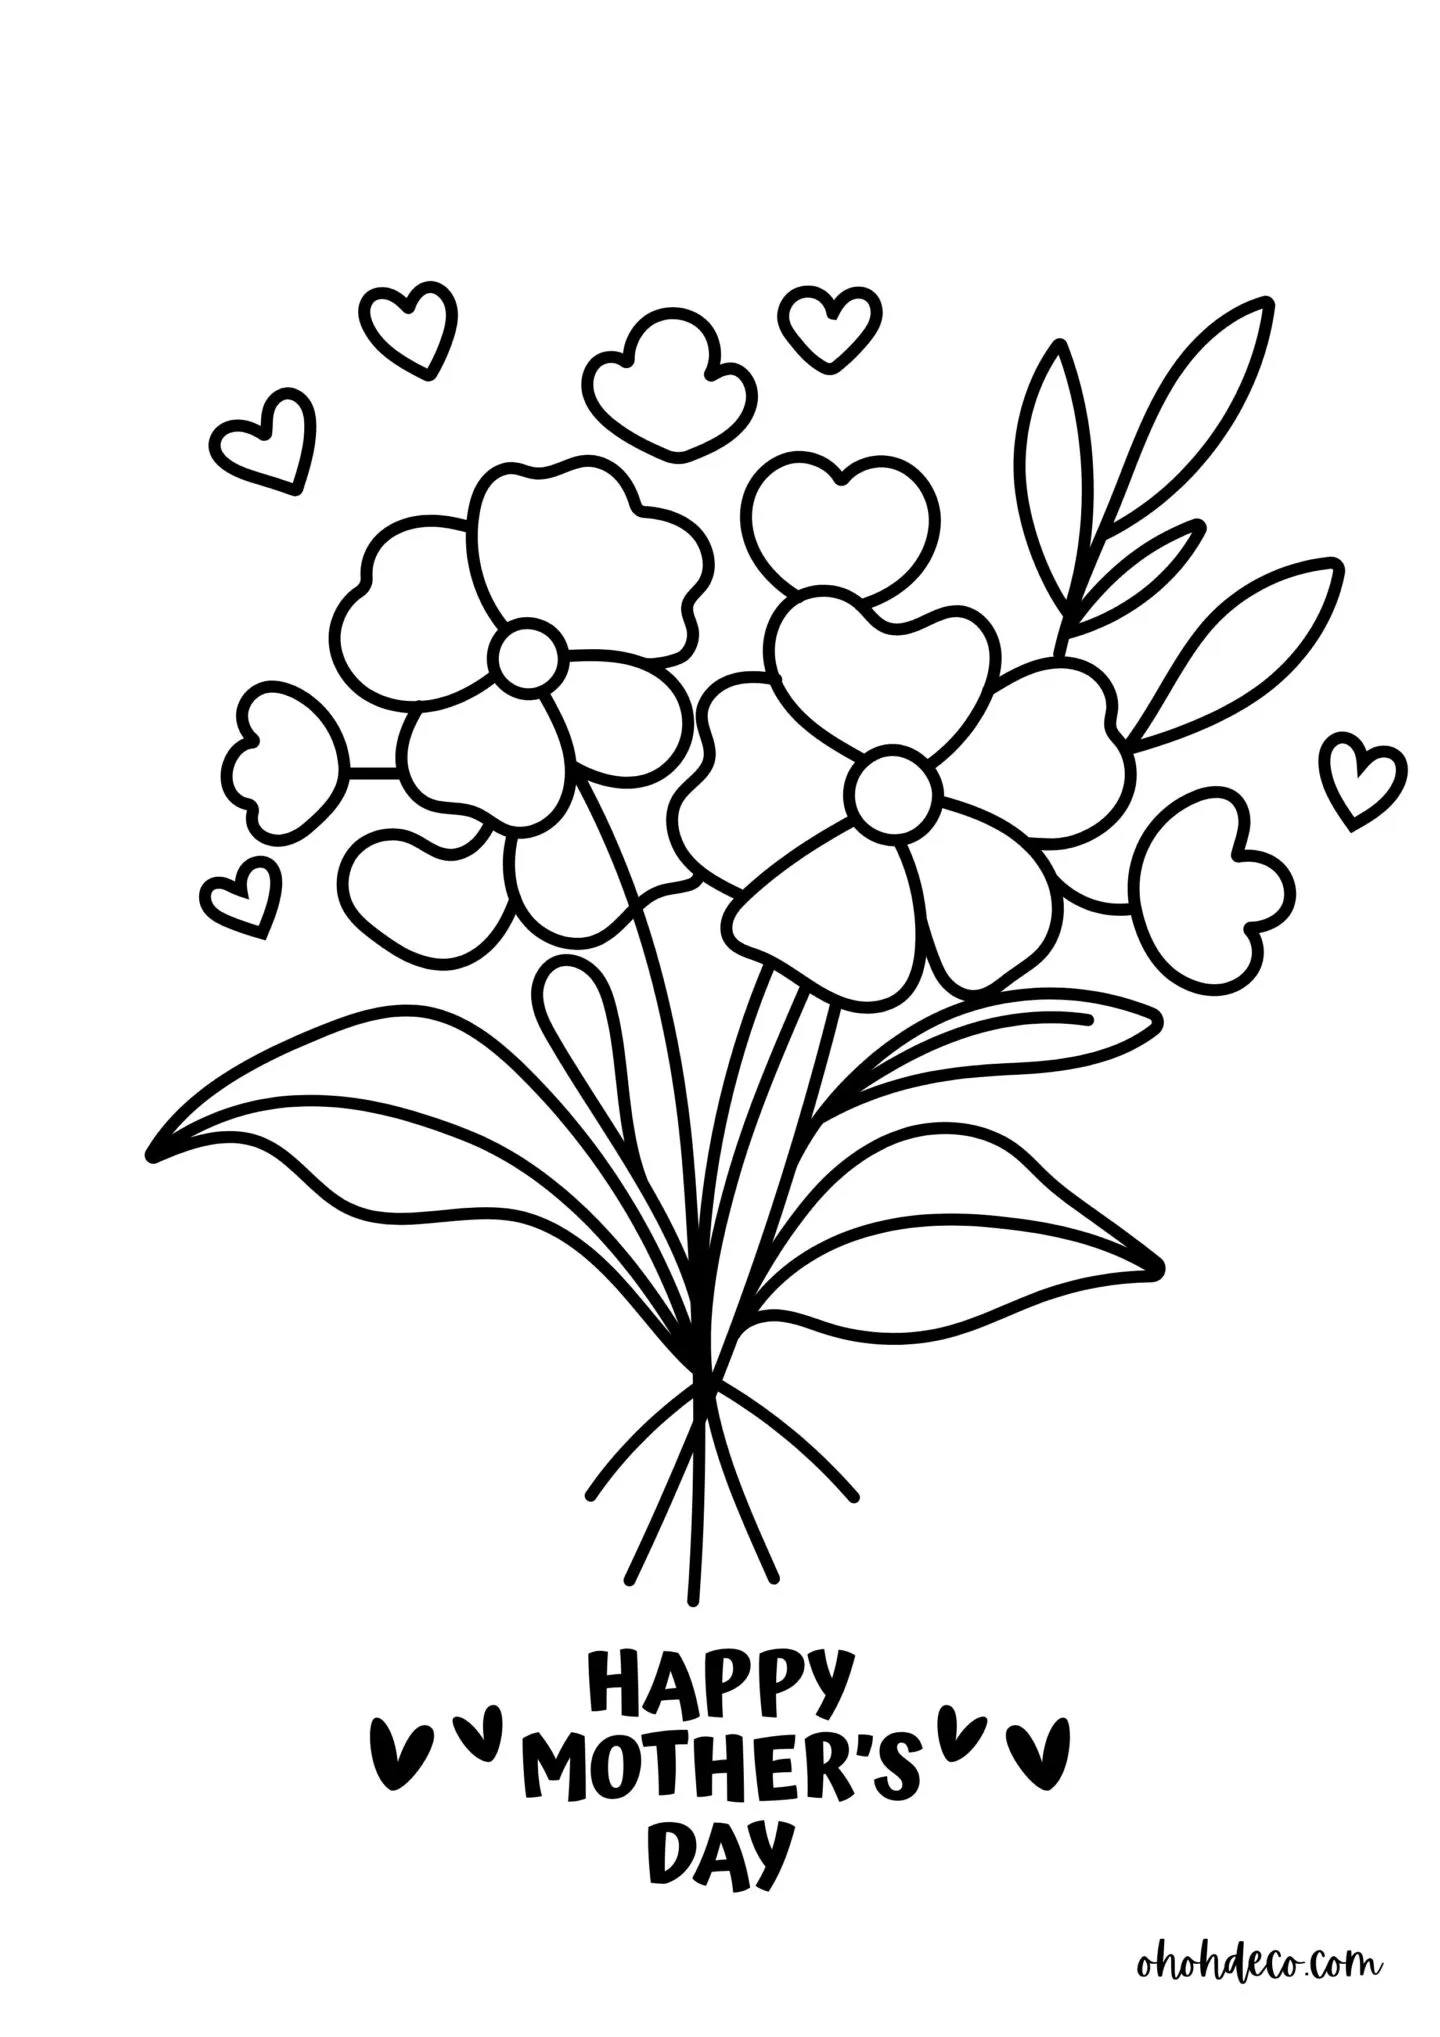 mother's day free coloring page